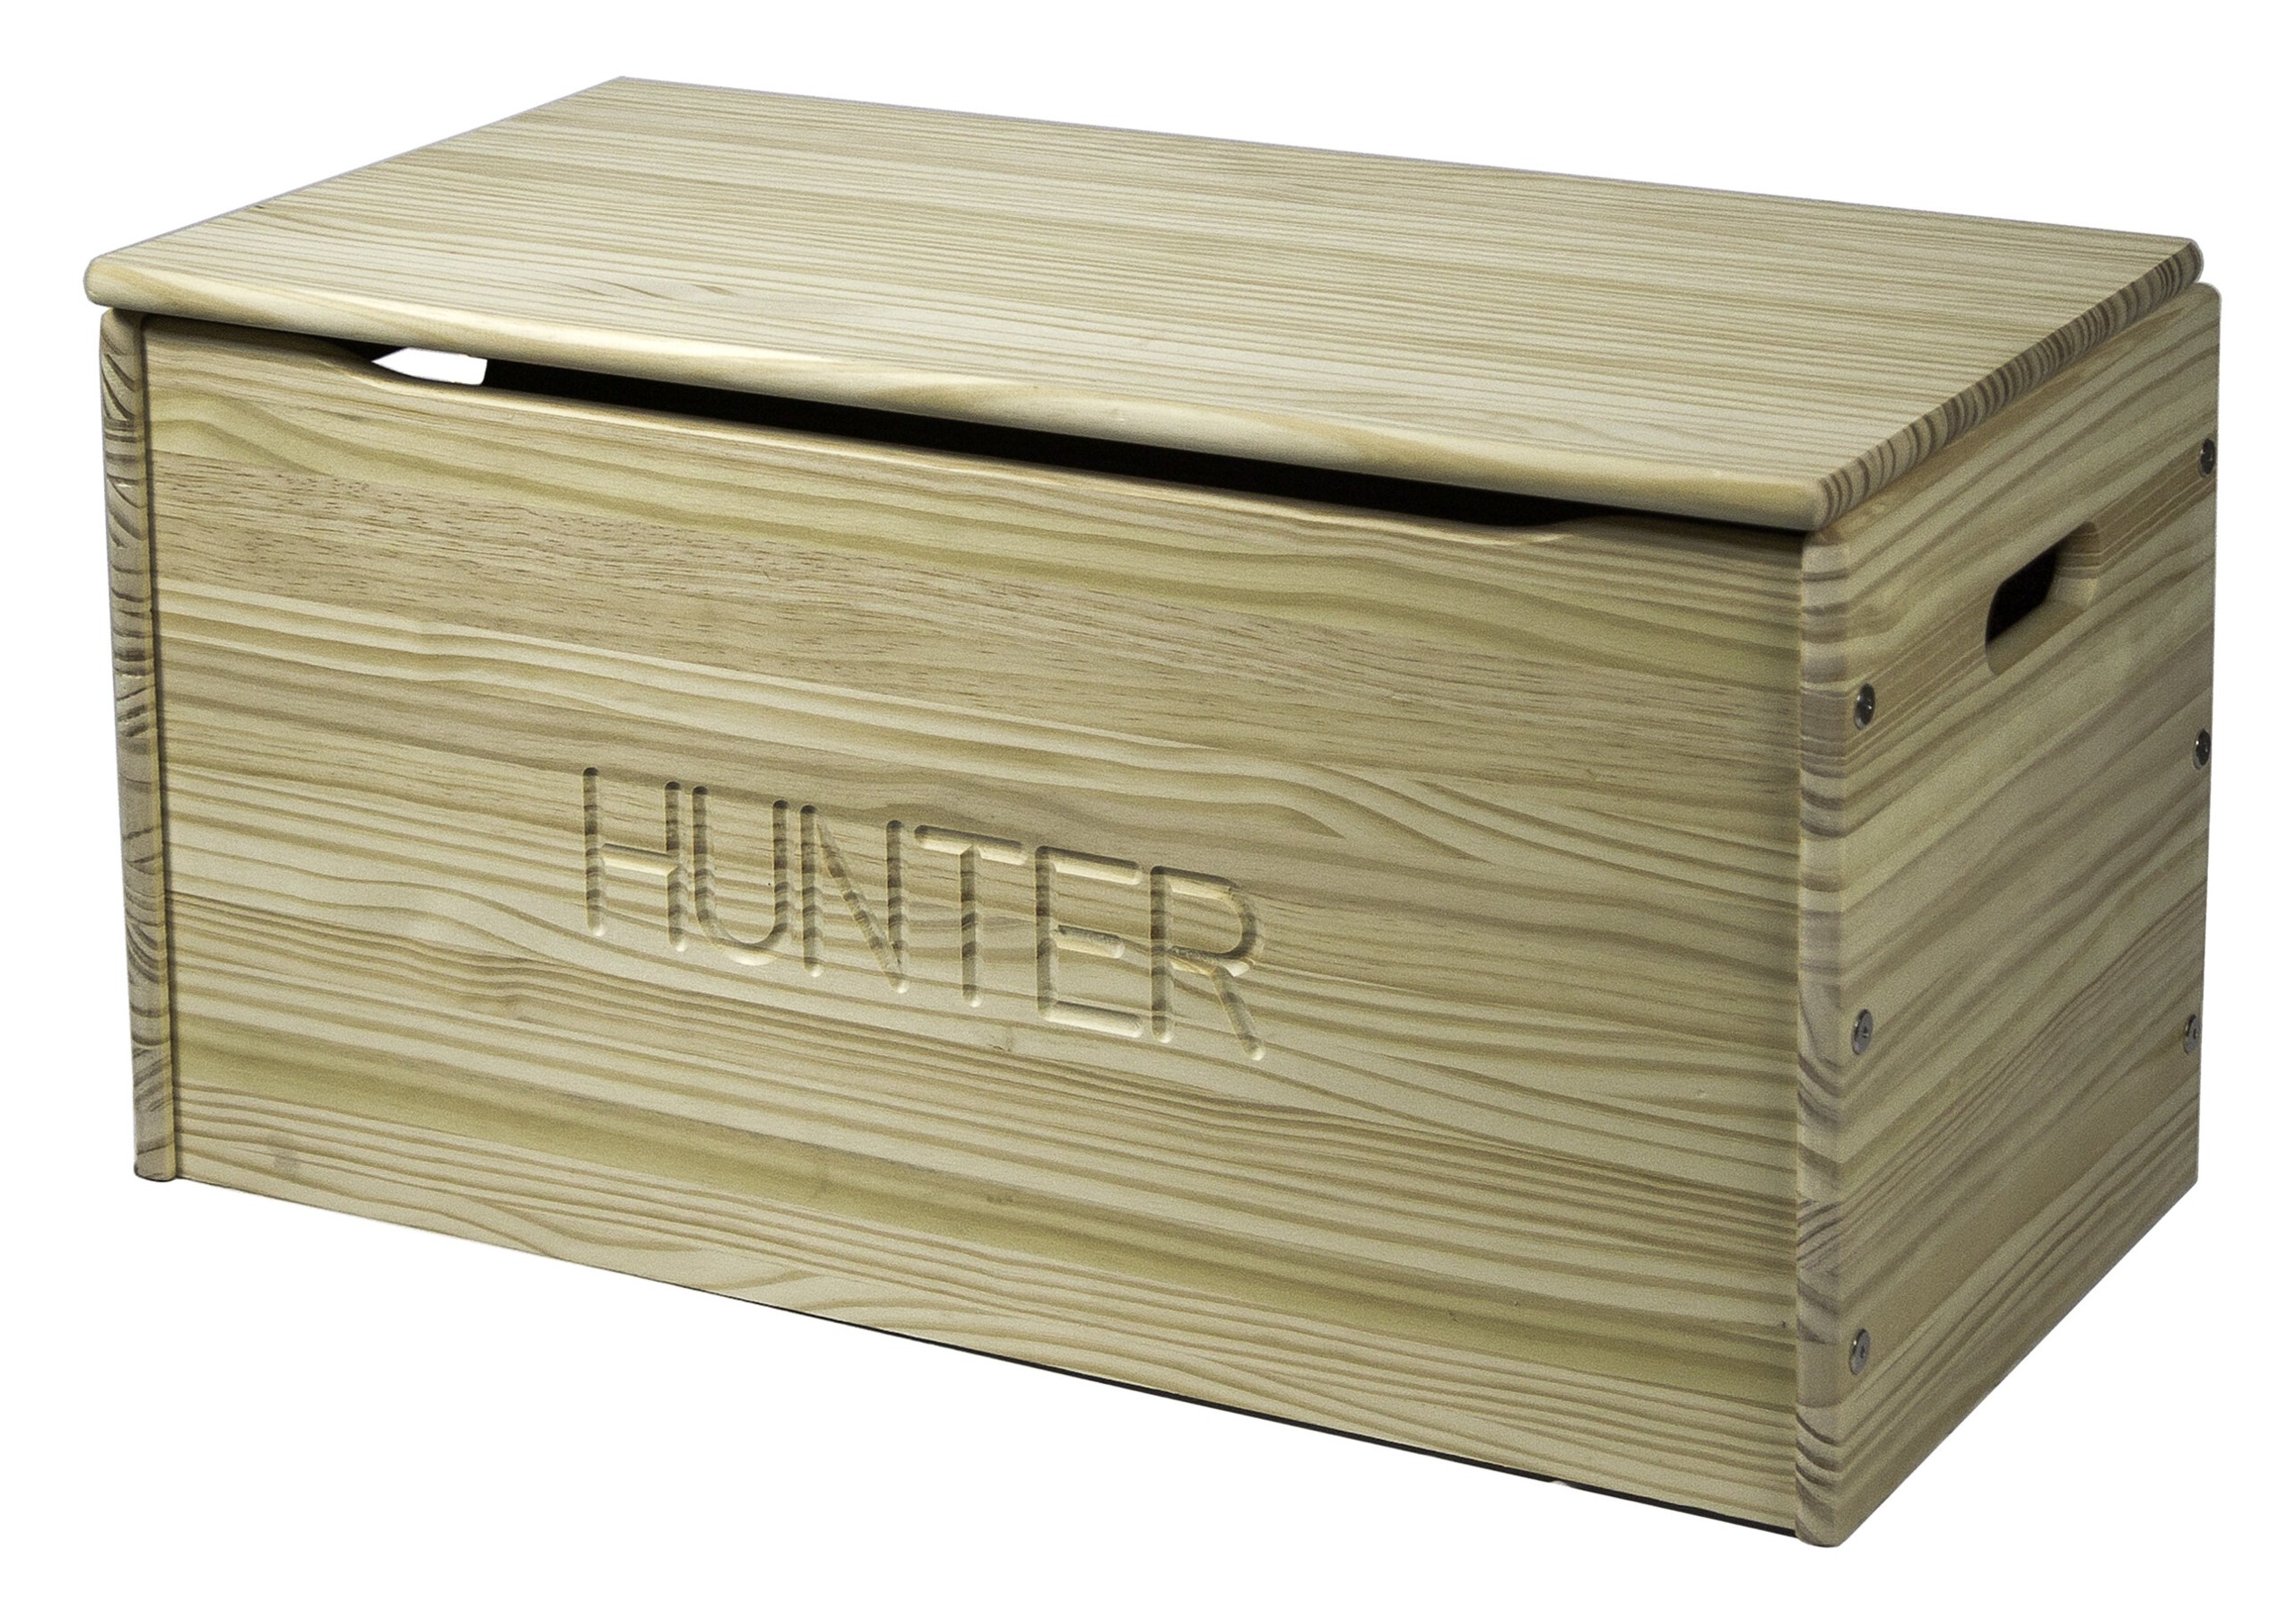 Personalized Toy Storage Chest